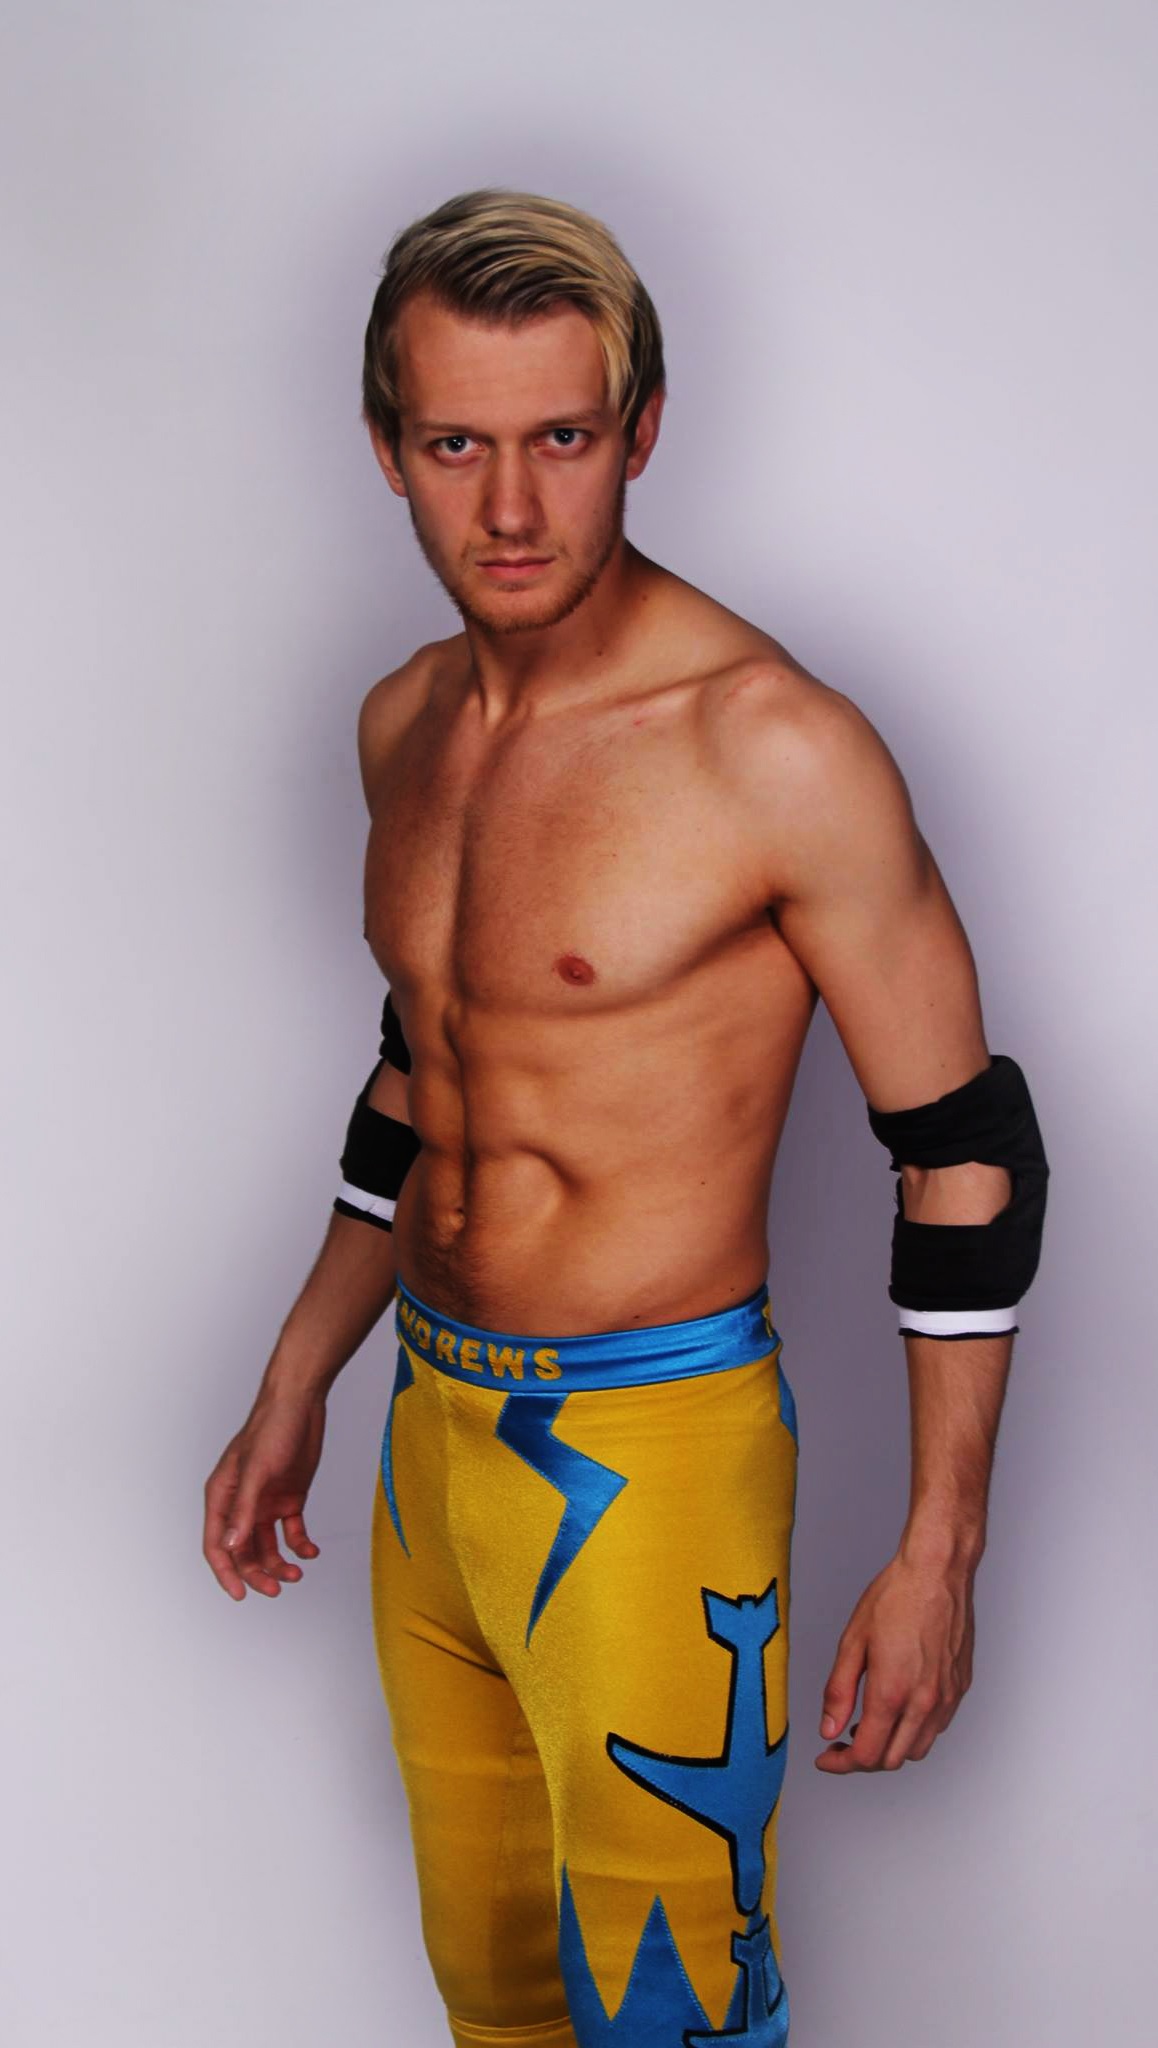 Profile of Mark Andrews